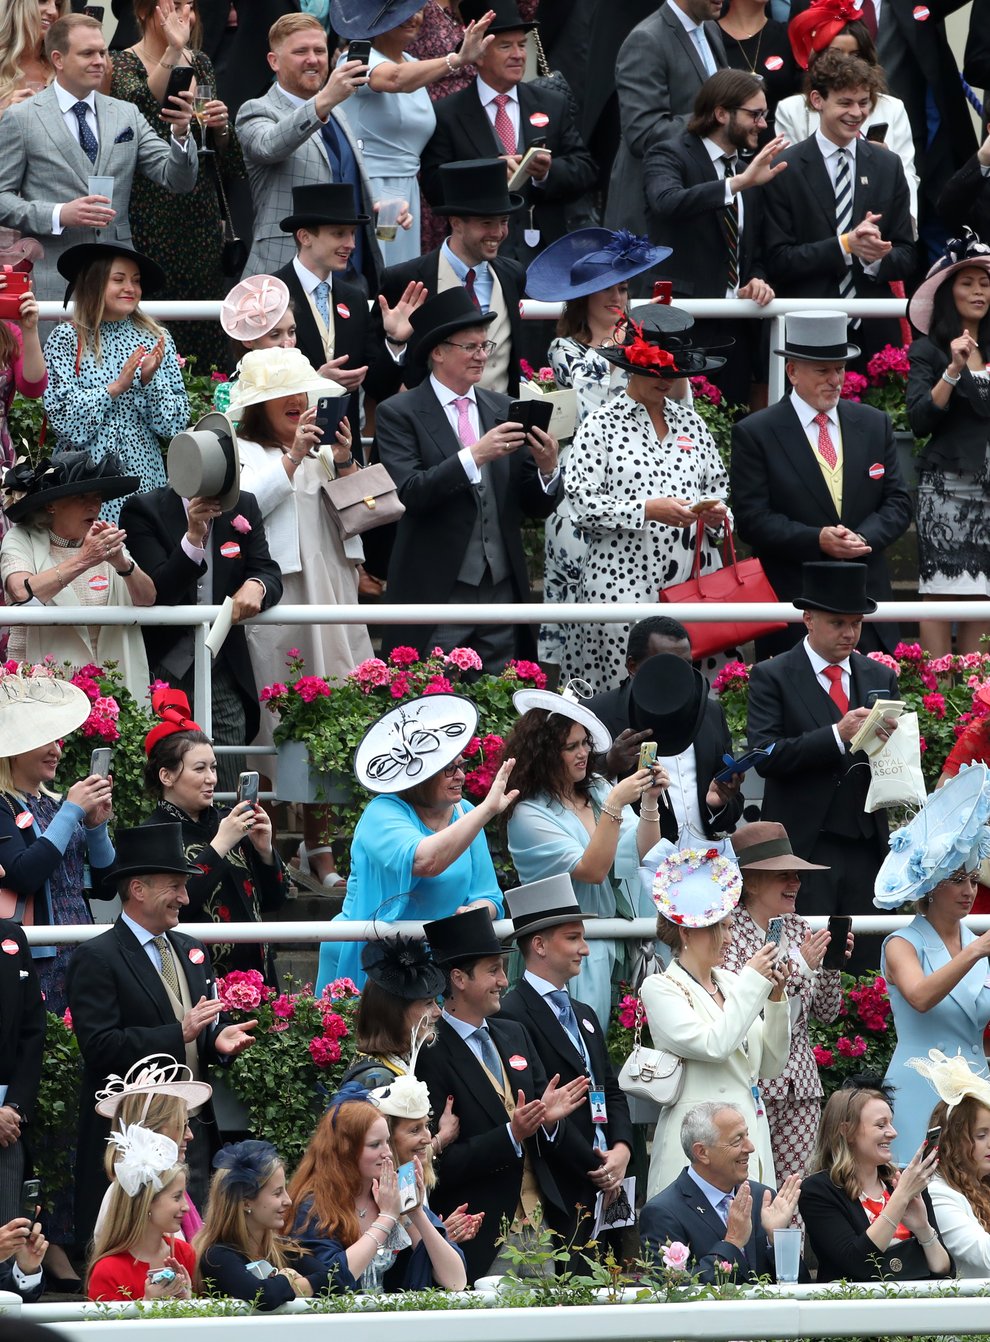 Crowds cheer as the Queen arrives on day five of Royal Ascot